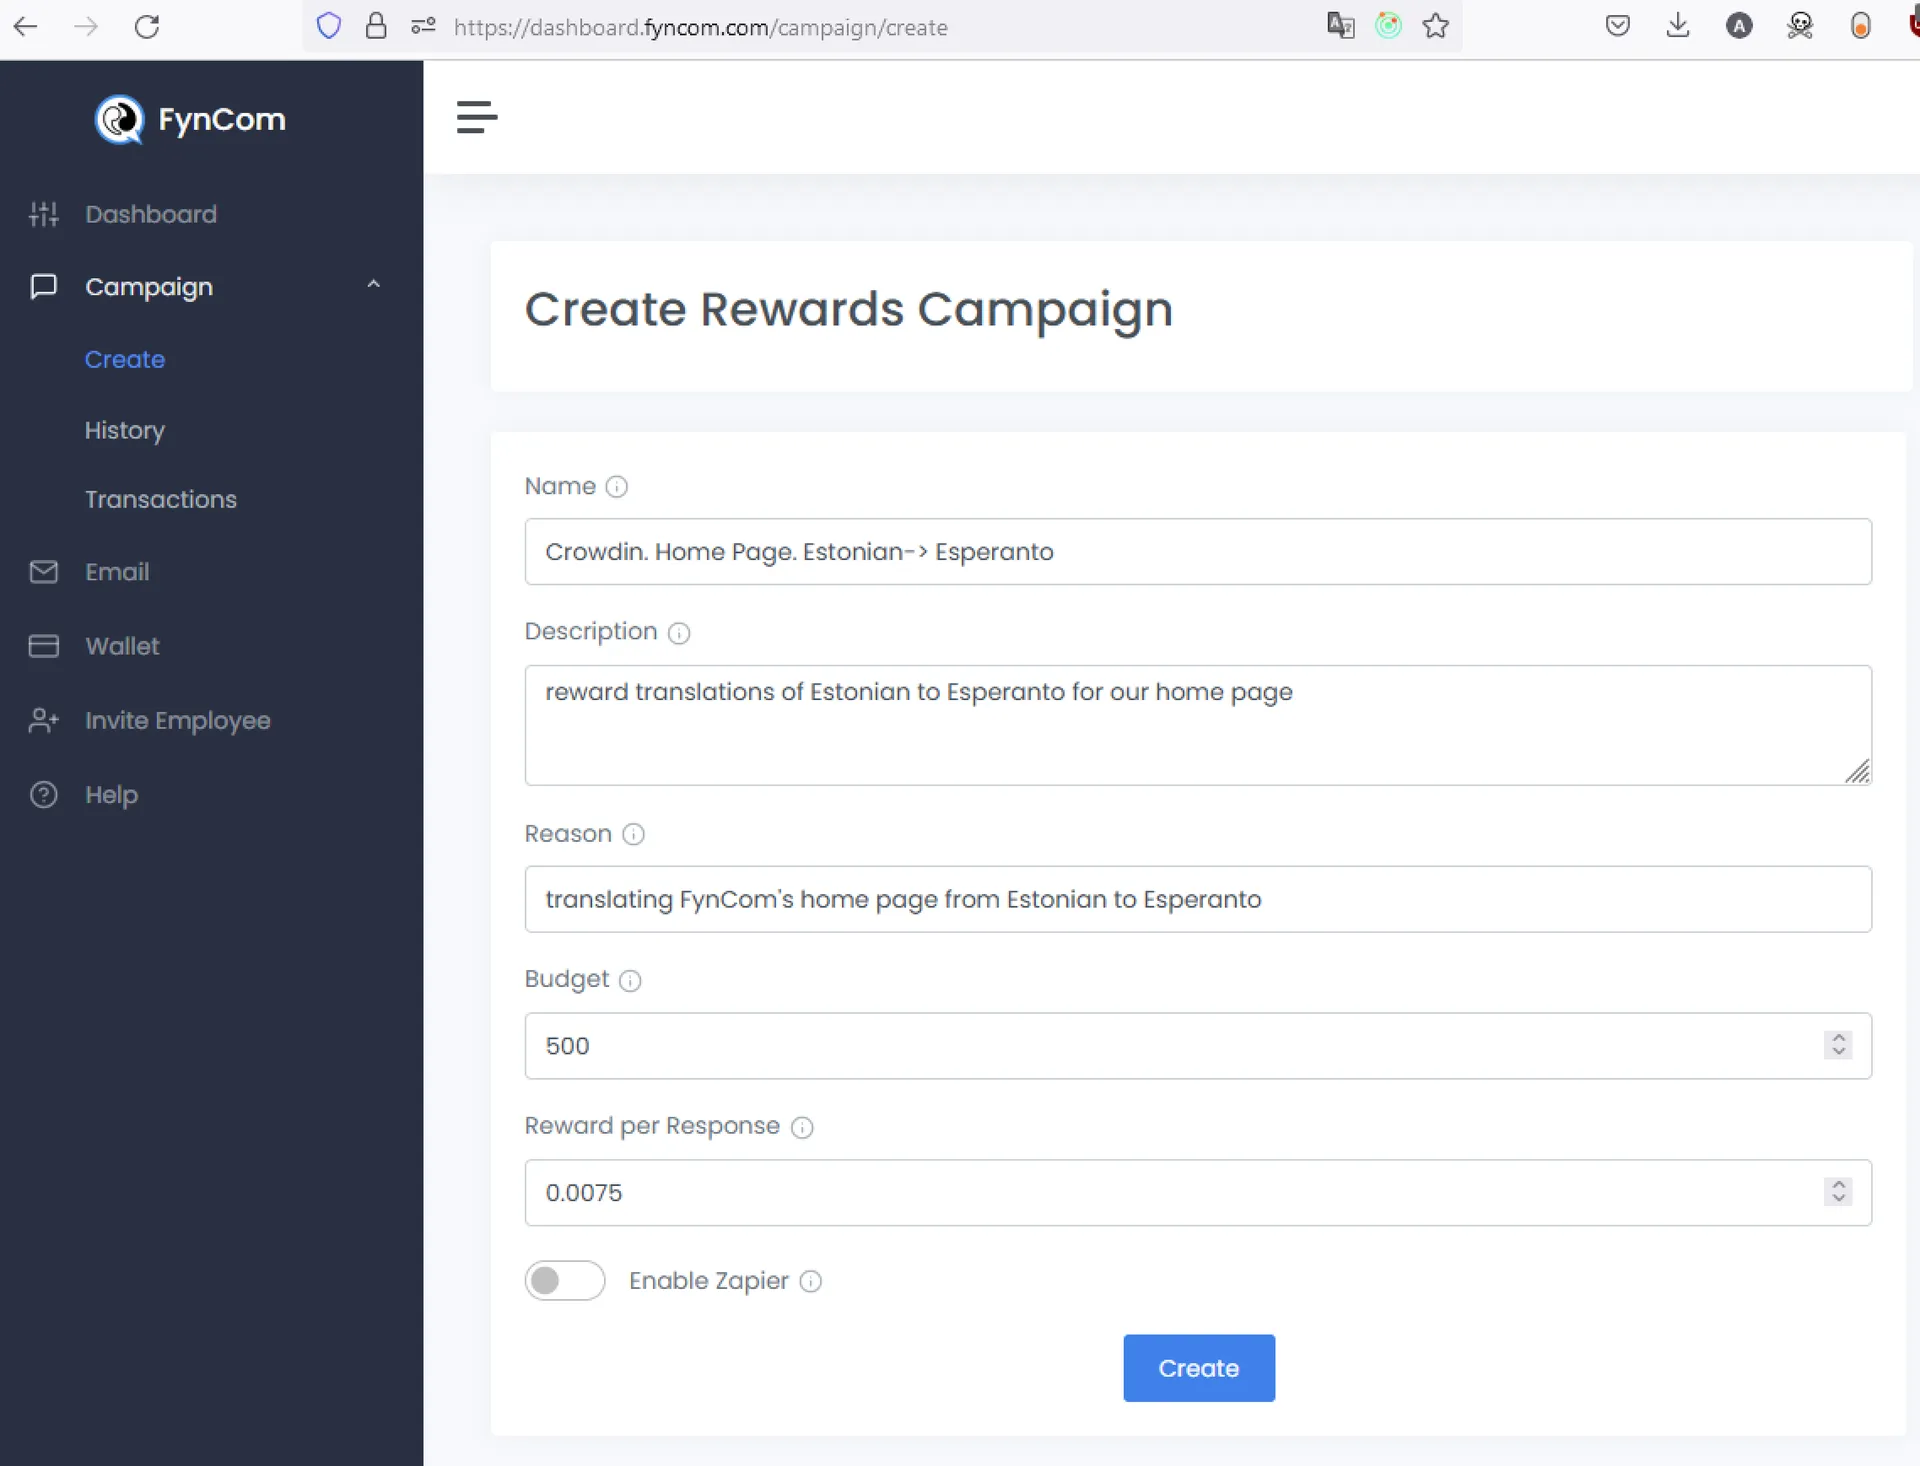 Setup your Crowdin Rewards Campaign at dashboard.fyncom.com in the Campaign create section